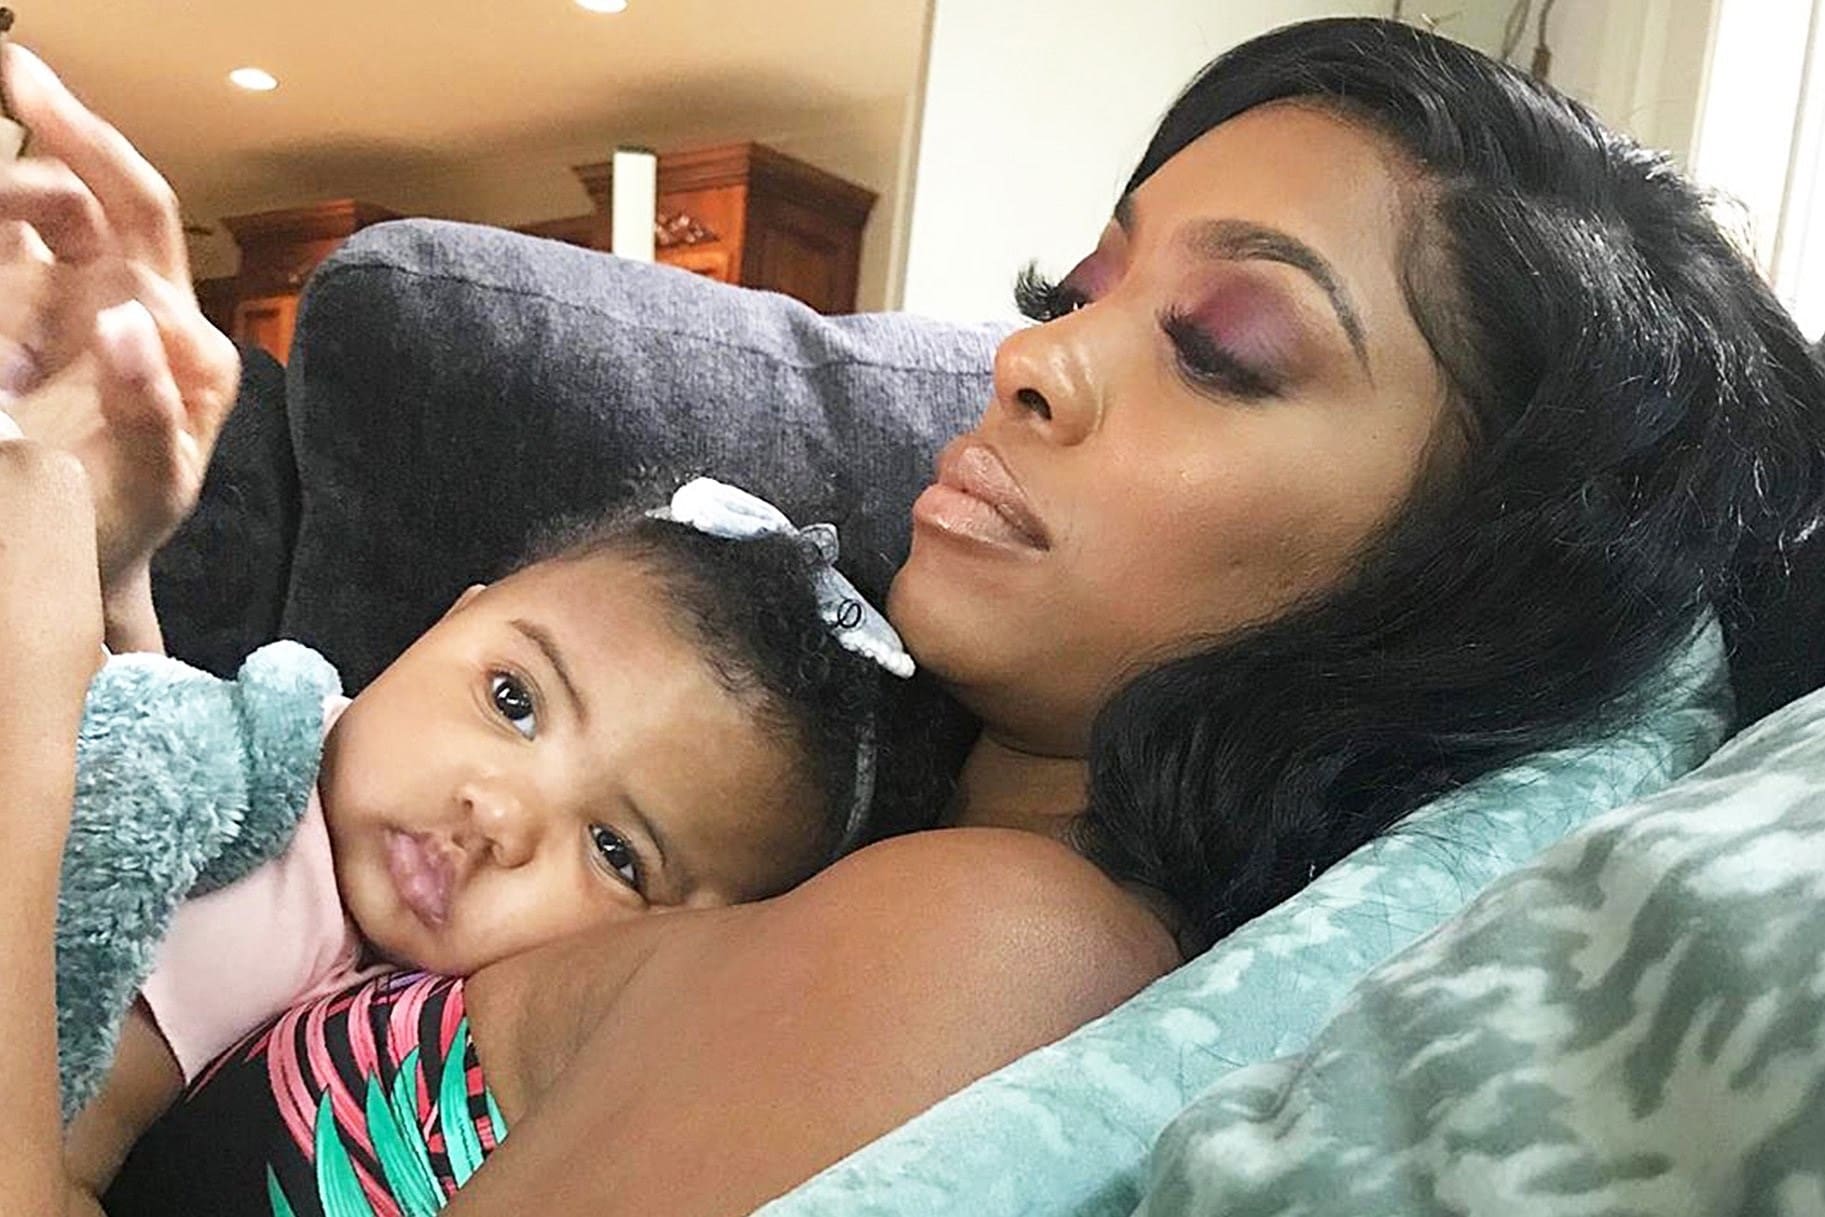 Porsha Williams' Daughter, Pilar Jhena Looks Really Sweet With Glasses On - See The Photo